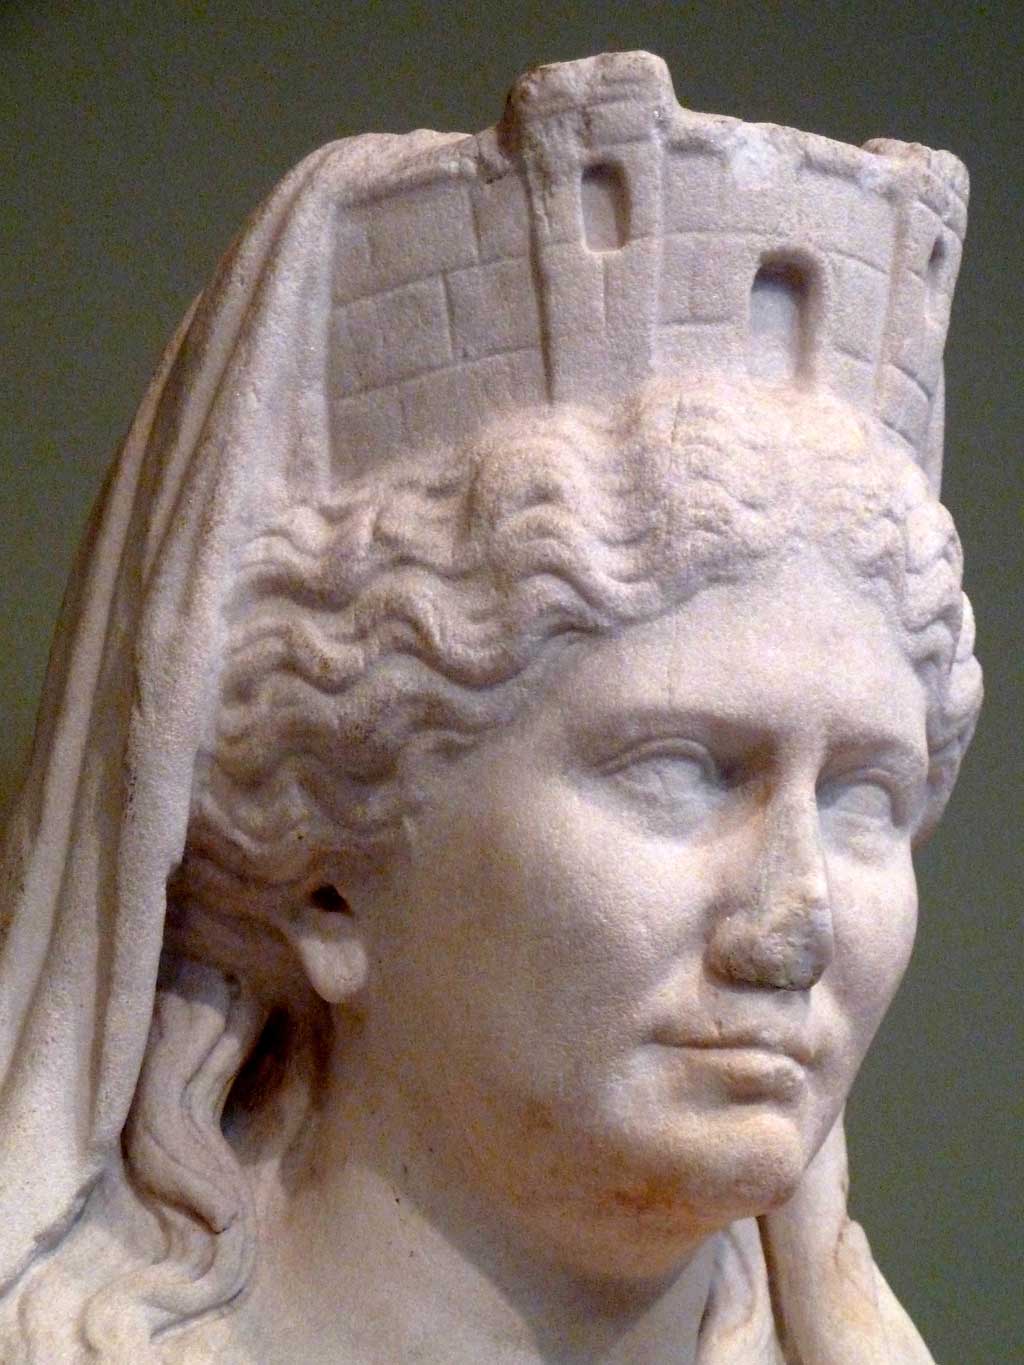 Cybele, the mother goddess, wears a crown in the form of a towered wall, a symbol of her role as protectress of cities, 50 CE, Roman, Getty Villa.